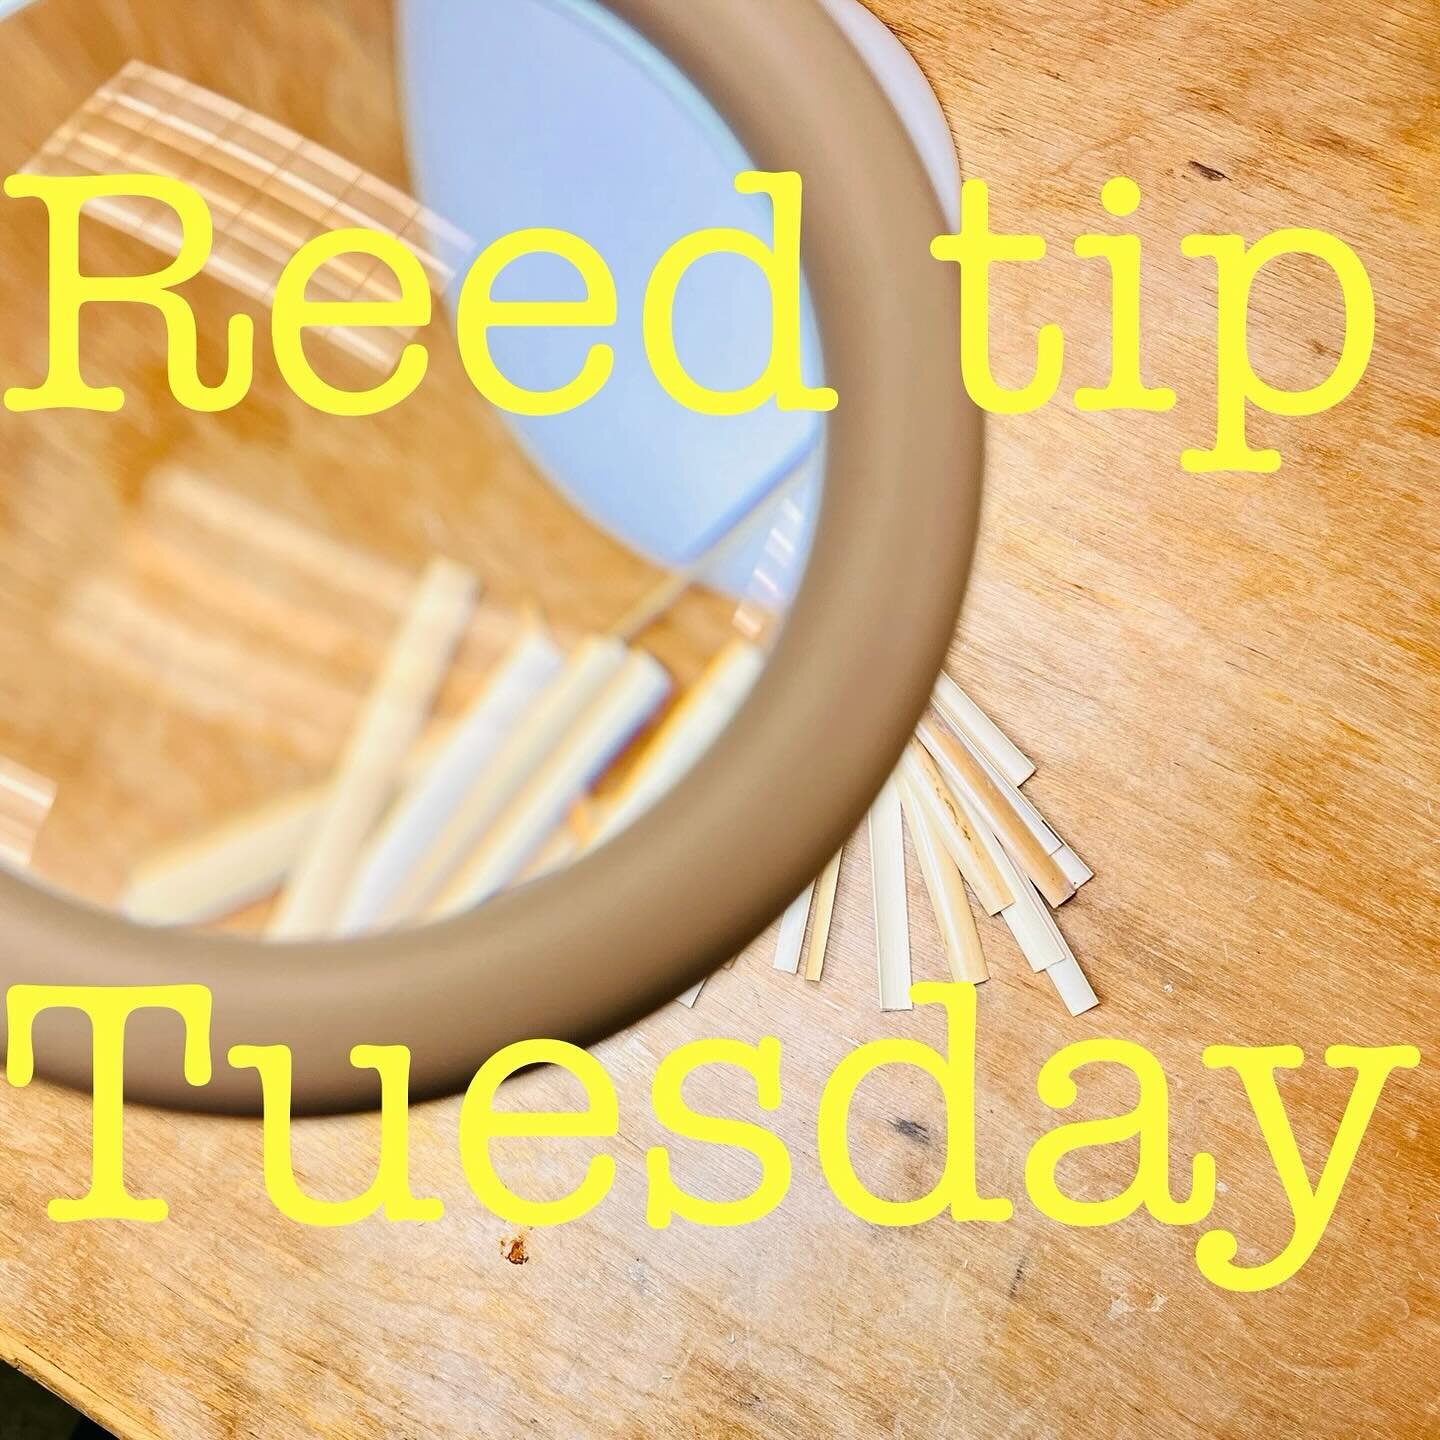 🛎️ Reed tip Tuesday! 

When you tie your oboe and English horn reeds pay attention to the alignment between the mandrel, staple and cane. Do not allow your shaped cane to slide to any other side; left, right and even up and down. 
Remember, you need